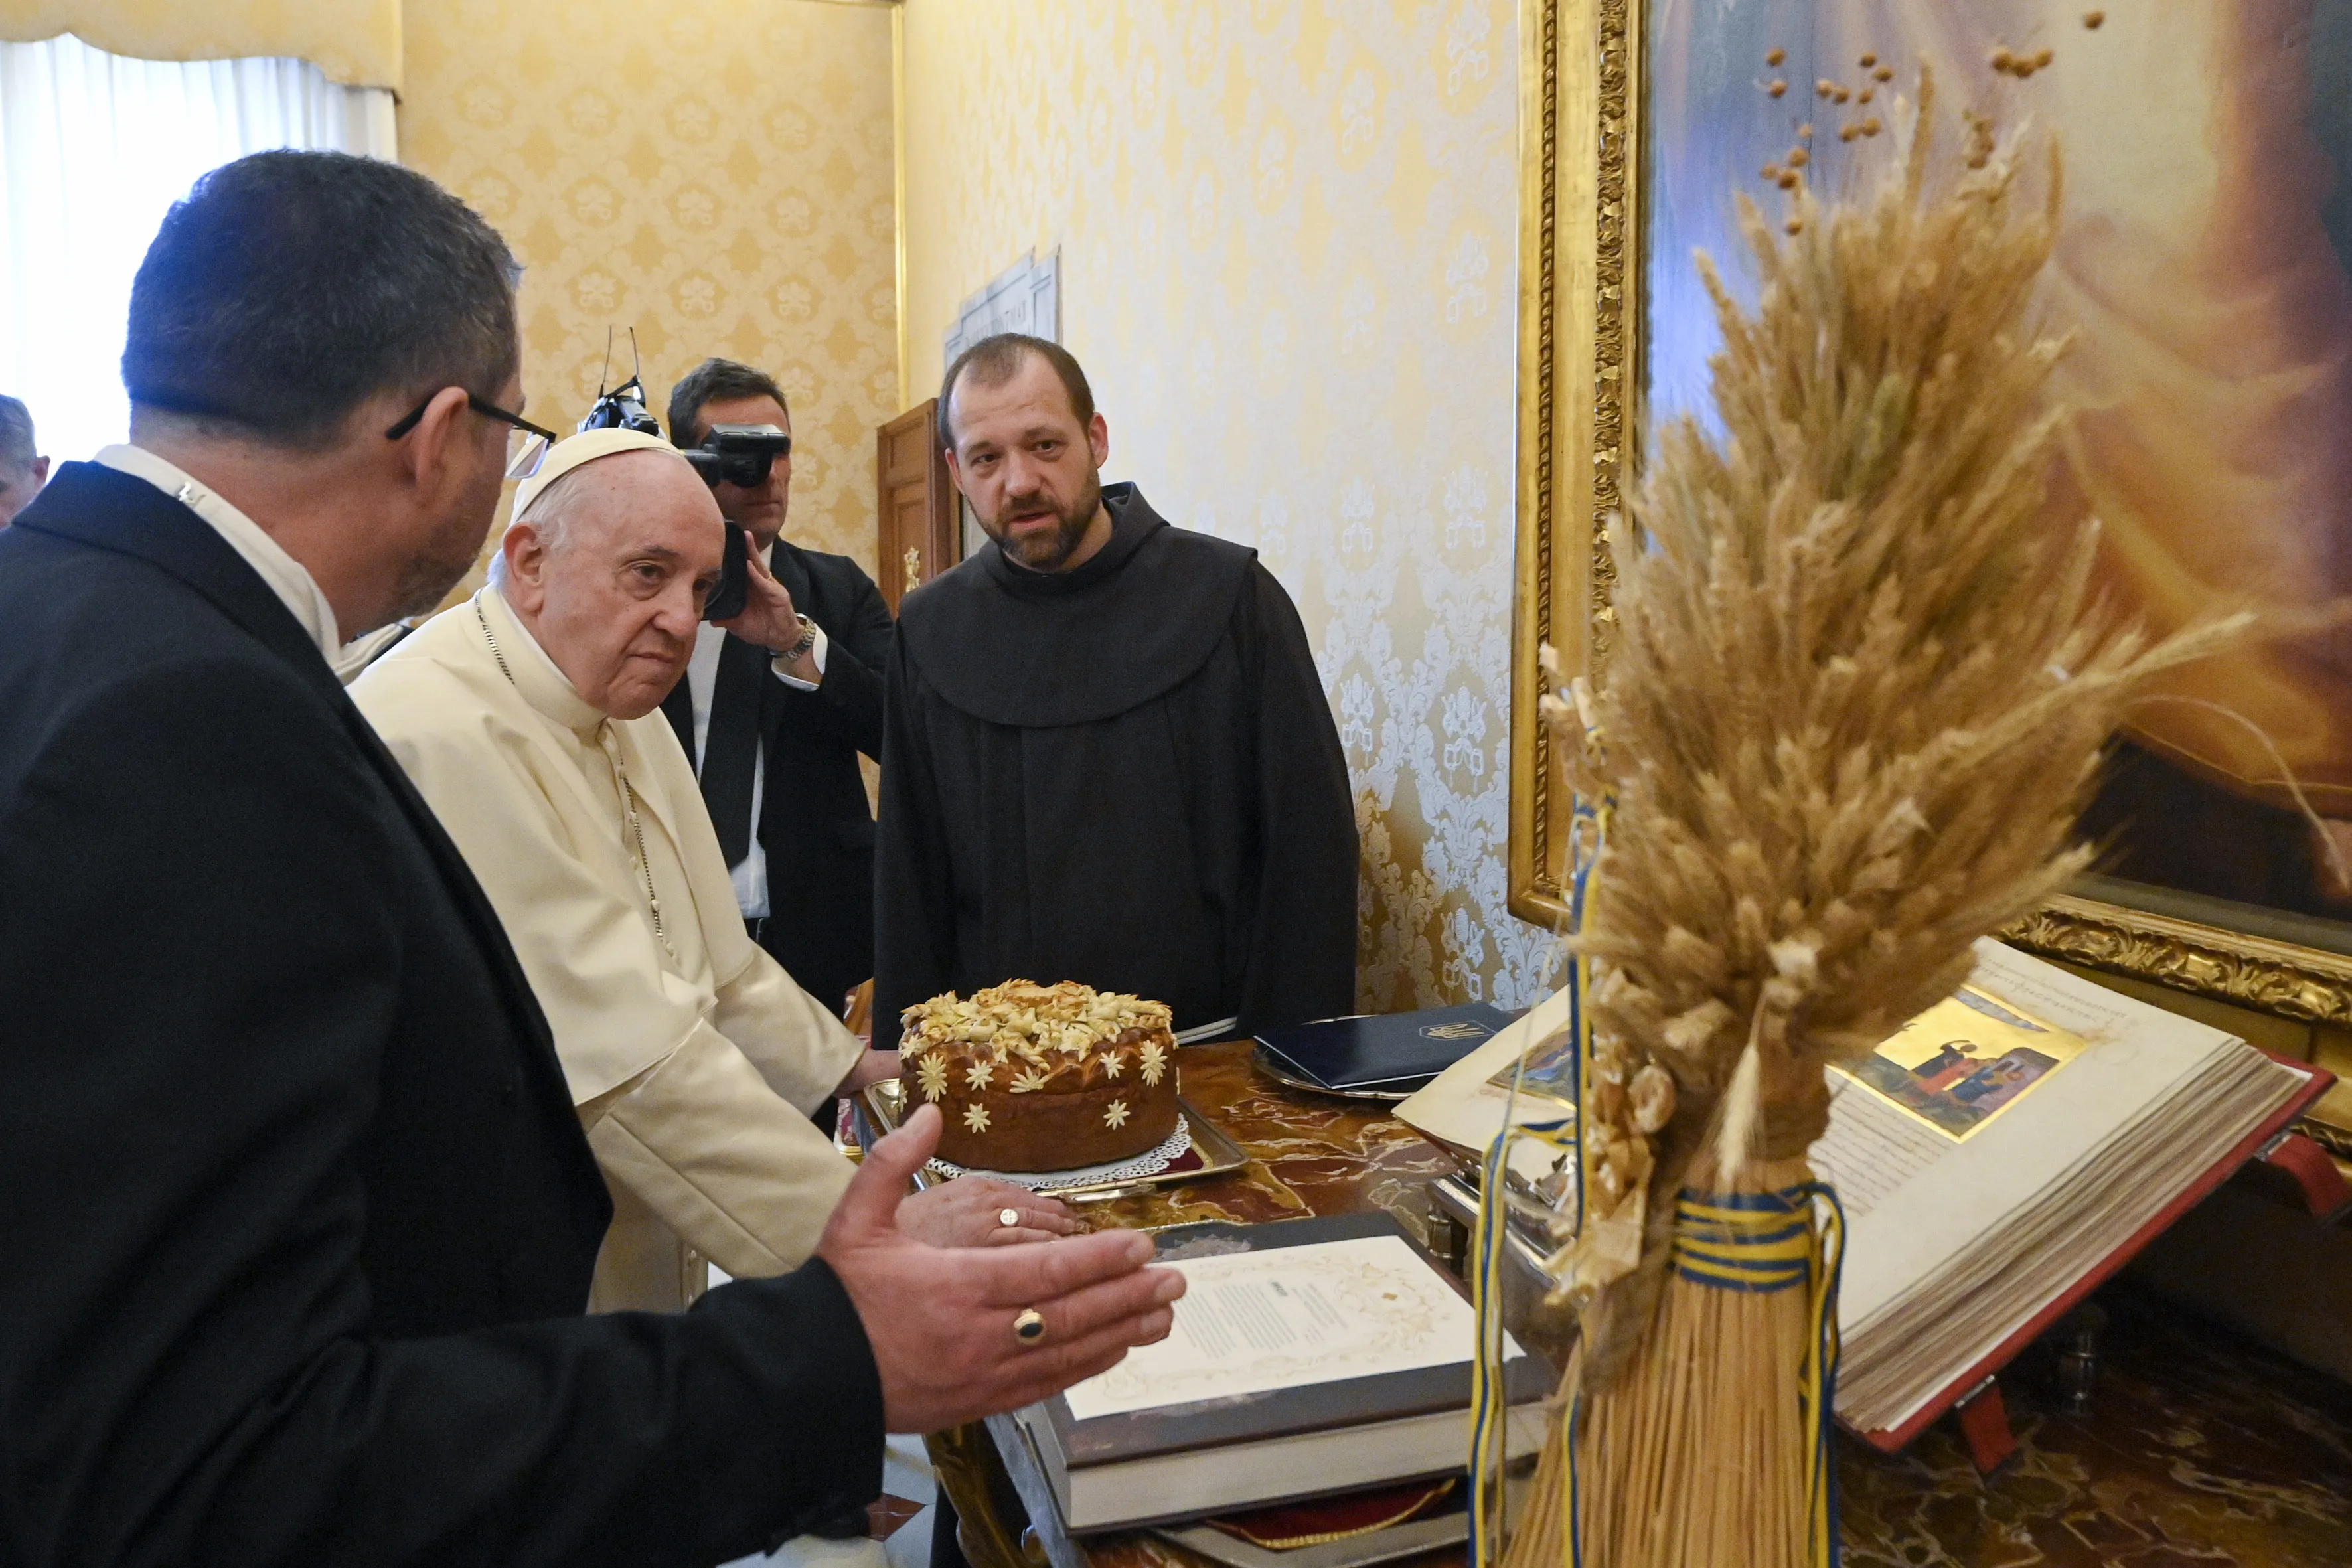 Ukraine's ambassador to the Holy See, Andrii Yurash, presents Pope Francis with gifts on April 7, 2022. Vatican Media